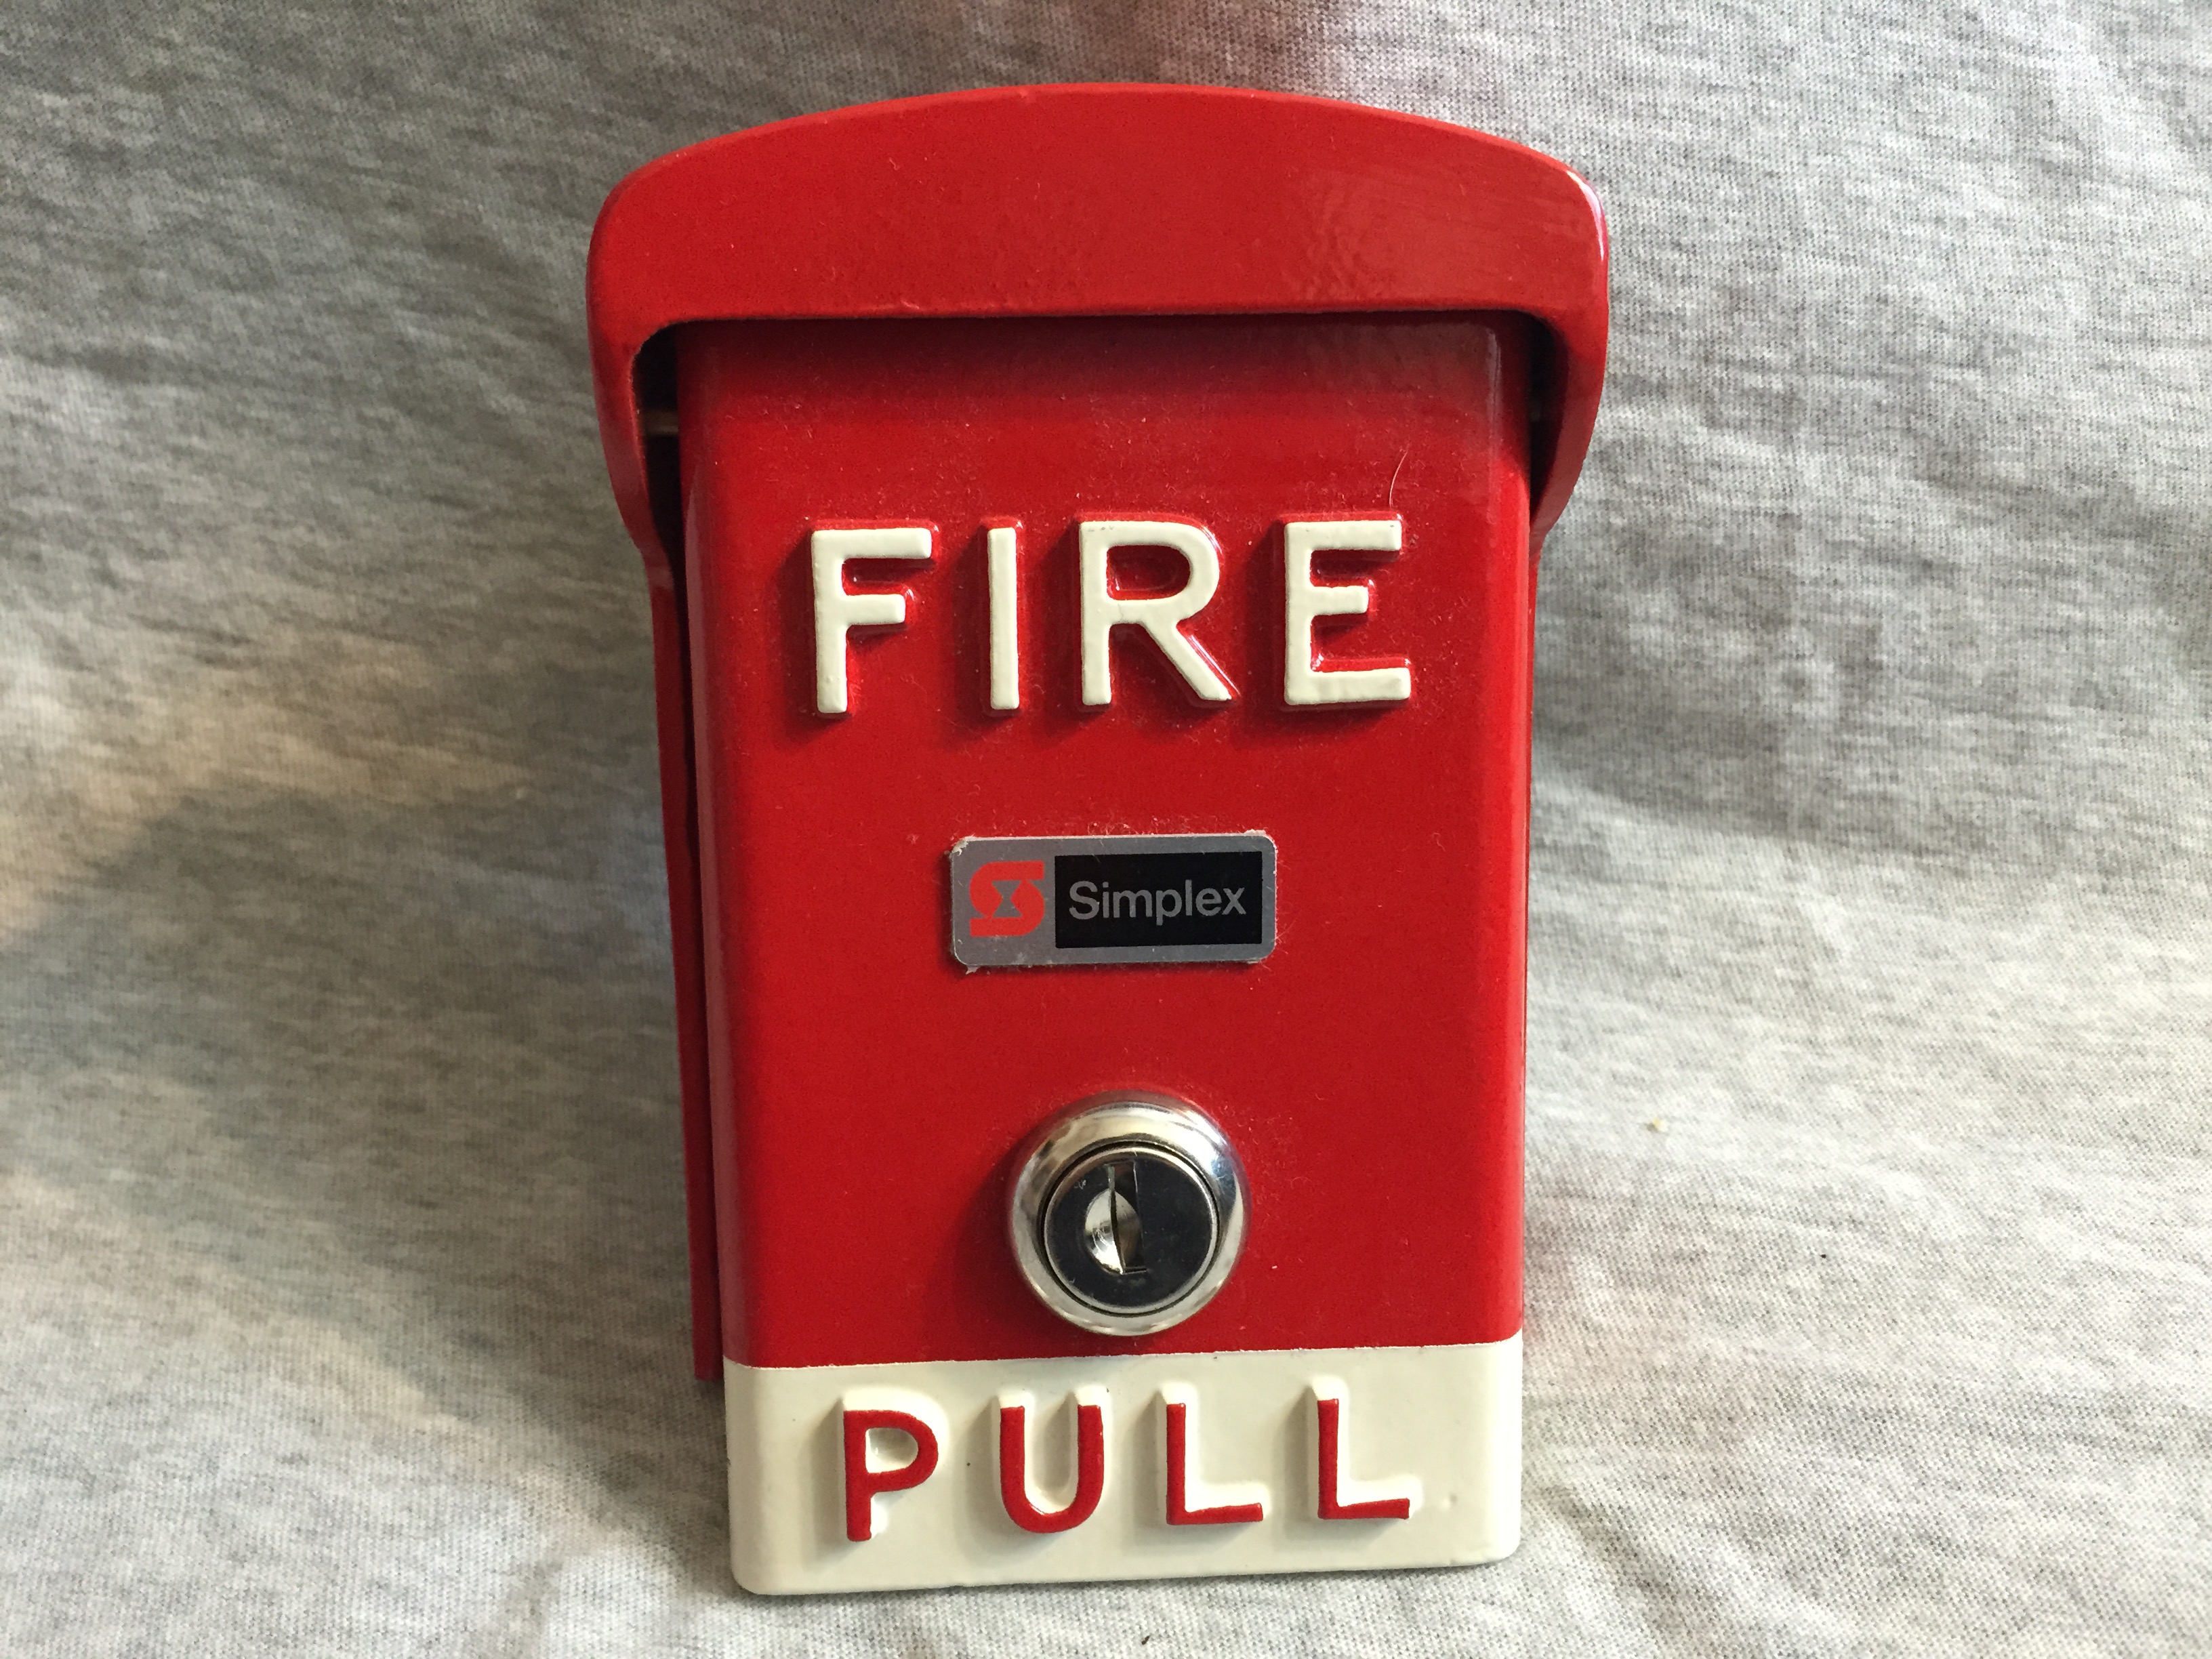 Simplex 2099-9788 - Fire Alarm Collection, Information, Pictures, and ...